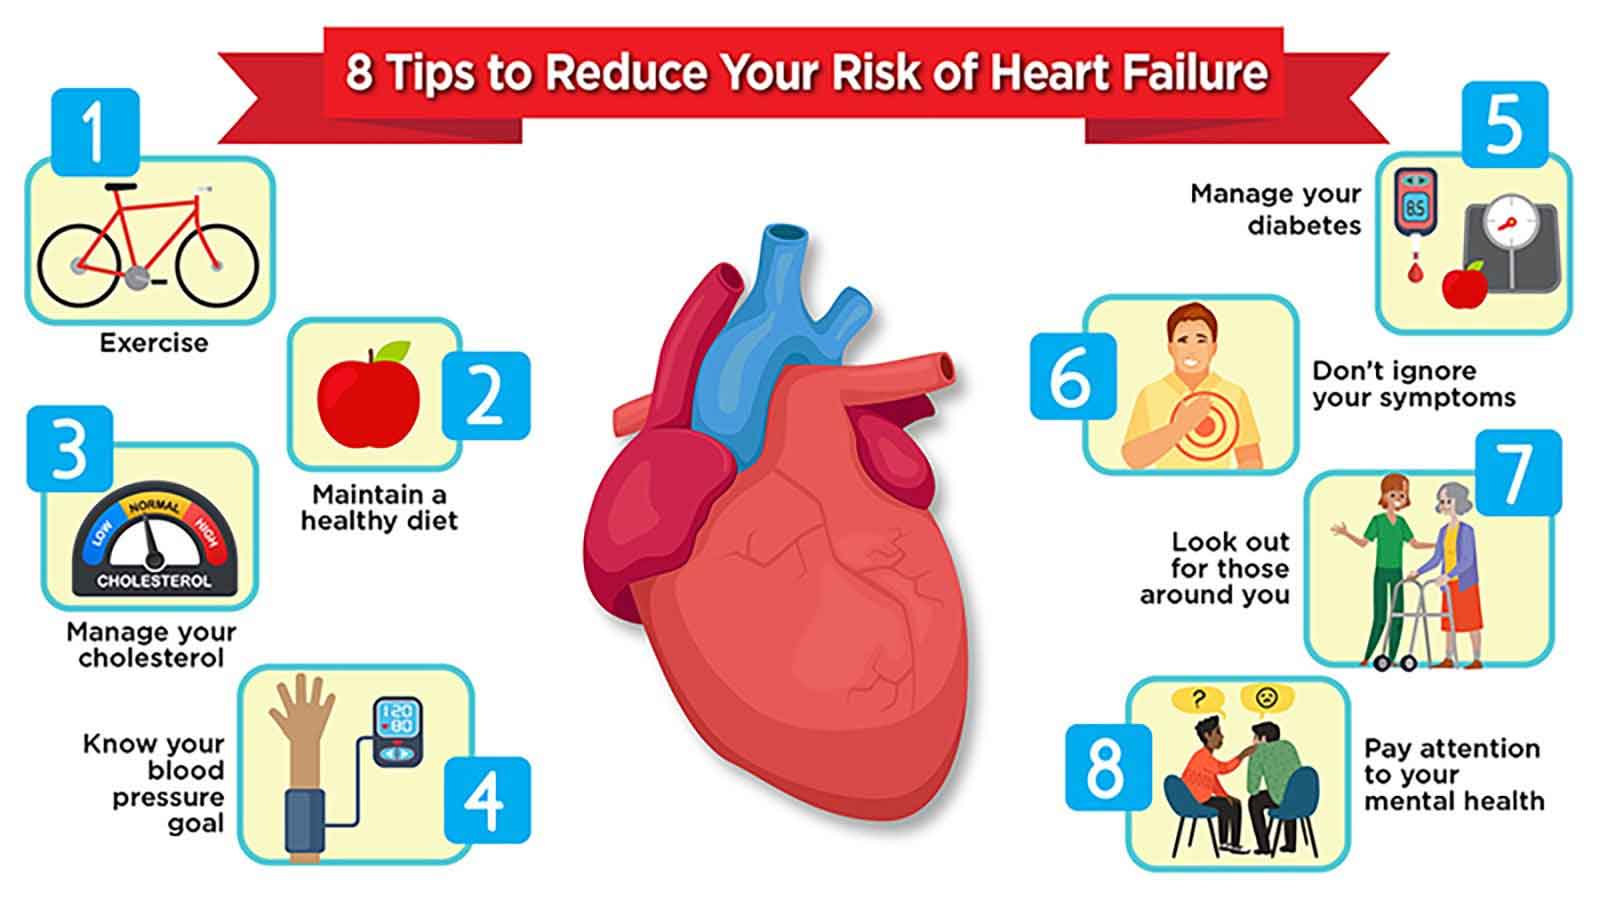 Tips for Reduce your Risk of Heart Failure